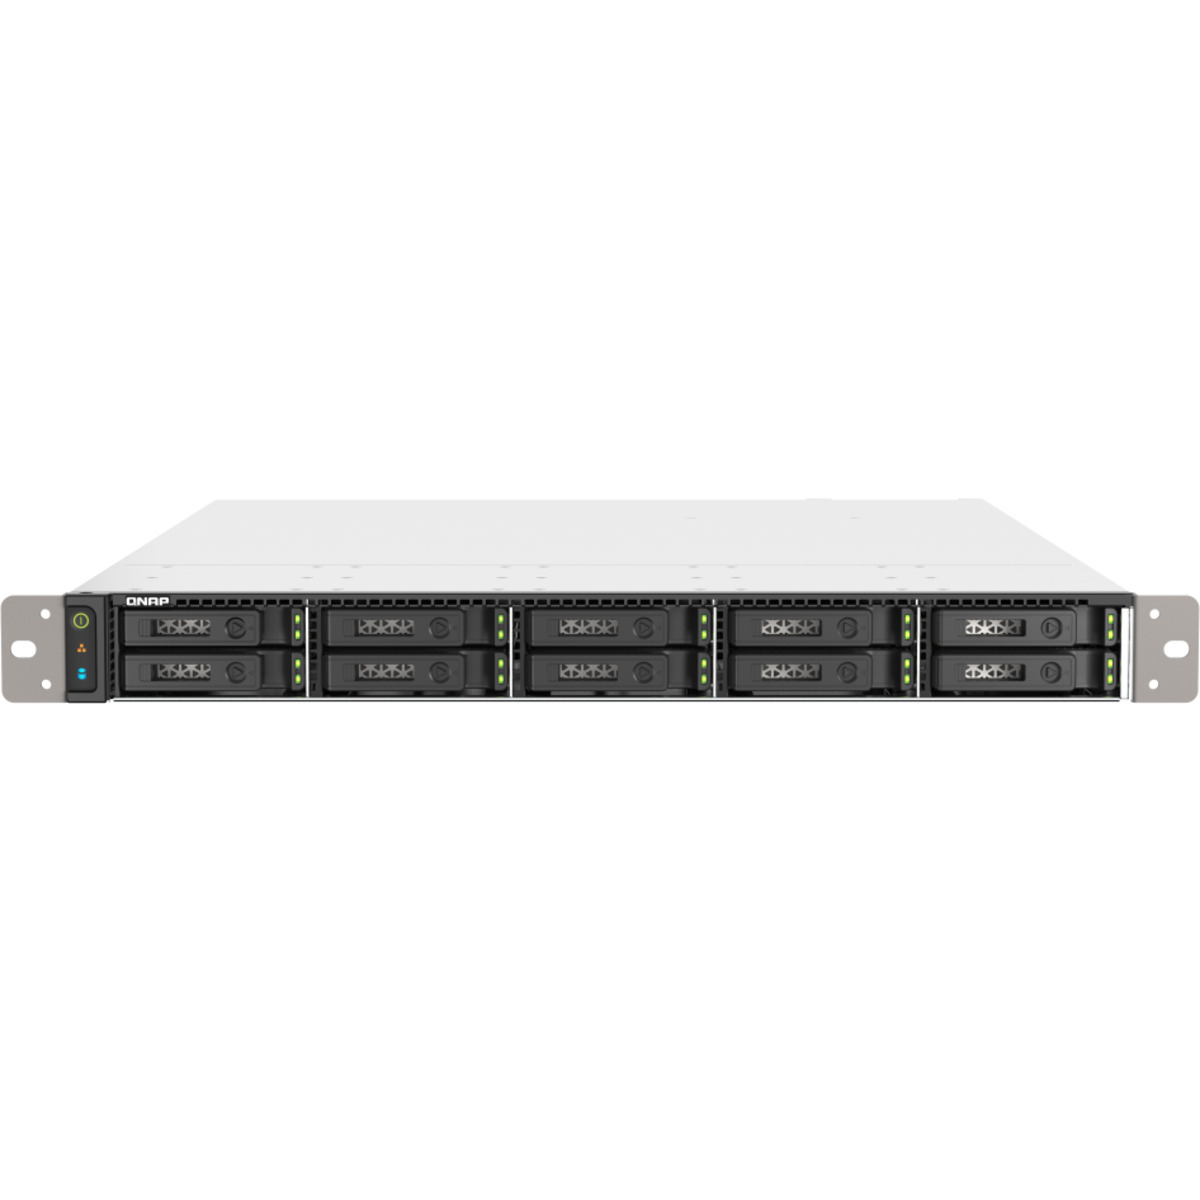 QNAP TS-h1090FU-7232P 24tb 10-Bay RackMount Large Business / Enterprise NAS - Network Attached Storage Device 6x4tb Sabrent Rocket 4 Plus SB-RKT4P-4TB  7000/6850MB/s M.2 2280 NVMe SSD CONSUMER Class Drives Installed - Burn-In Tested TS-h1090FU-7232P